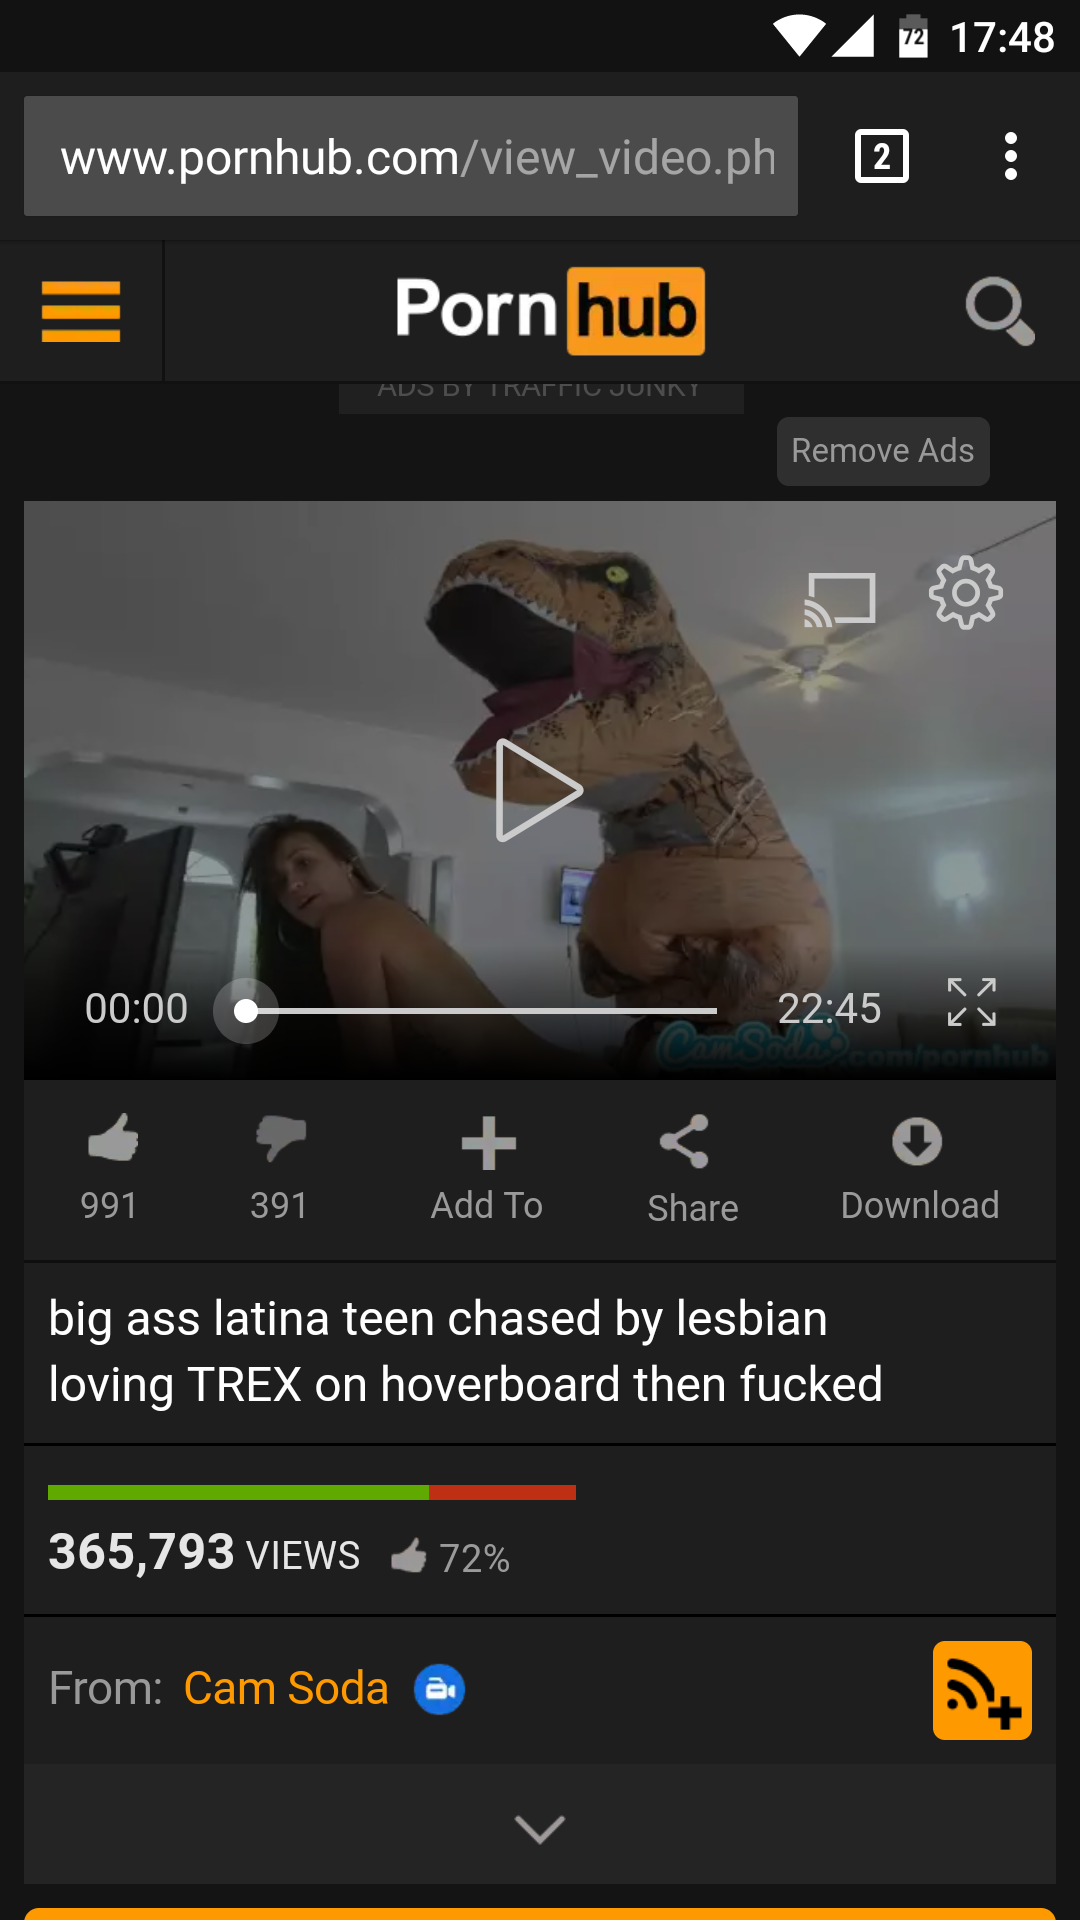 memes  - samurai jack season 5 memes - 1 2 Porn hub Remove Ads 991 391 Add To Download big ass latina teen chased by lesbian loving Trex on hoverboard then fucked 365,793 Views 72% From Cam Soda a